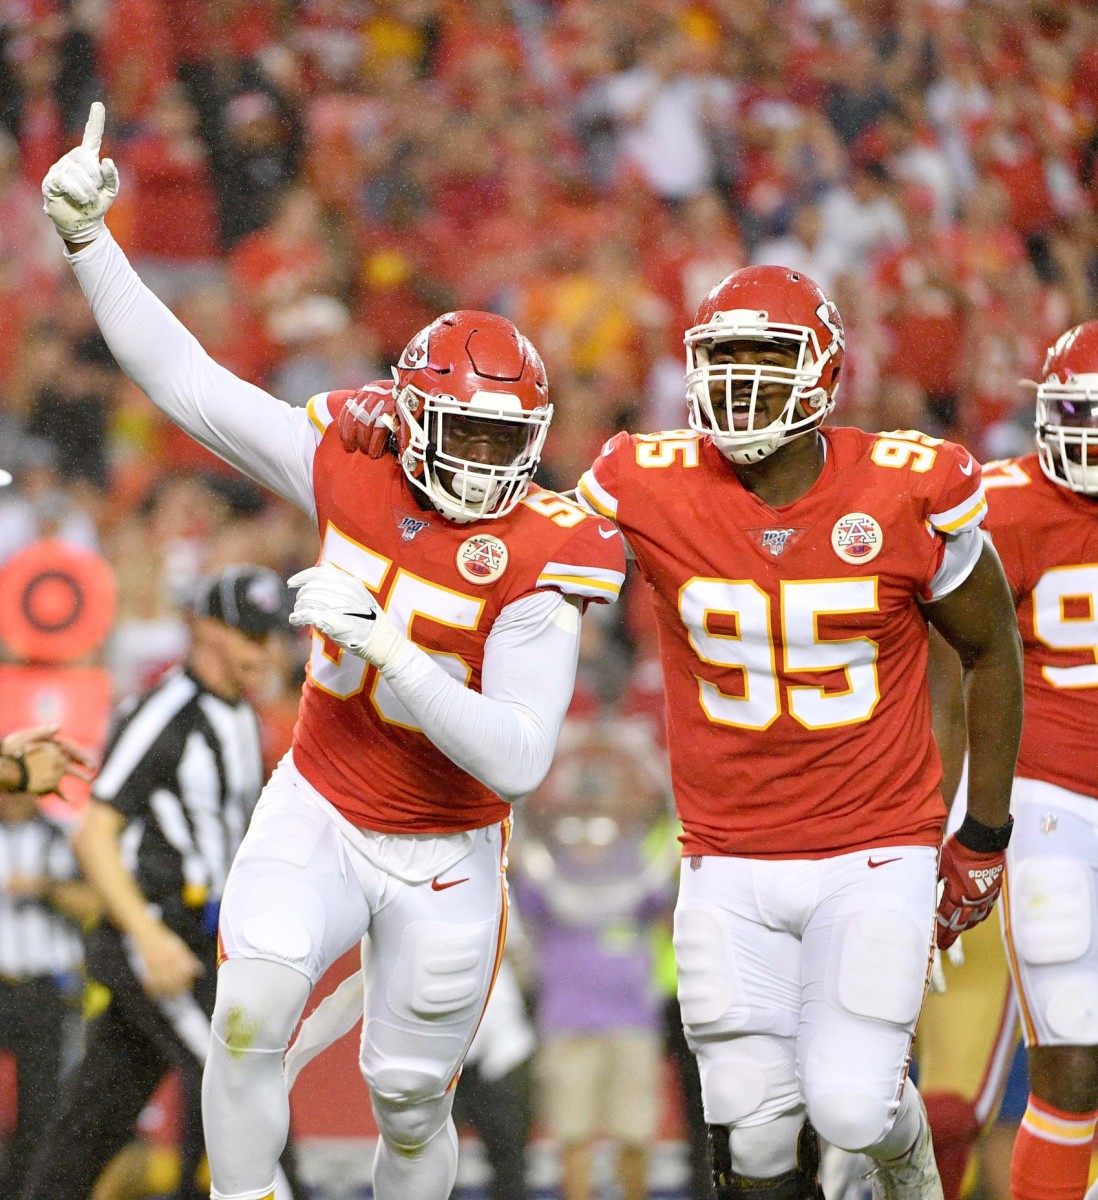 Aug 24, 2019; Kansas City, MO, USA; Kansas City Chiefs defensive end Frank Clark (55) celebrates with defensive end Chris Jones (95) after a sack during the game against the San Francisco 49ers at Arrowhead Stadium. Mandatory Credit: Denny Medley-USA TODAY Sports